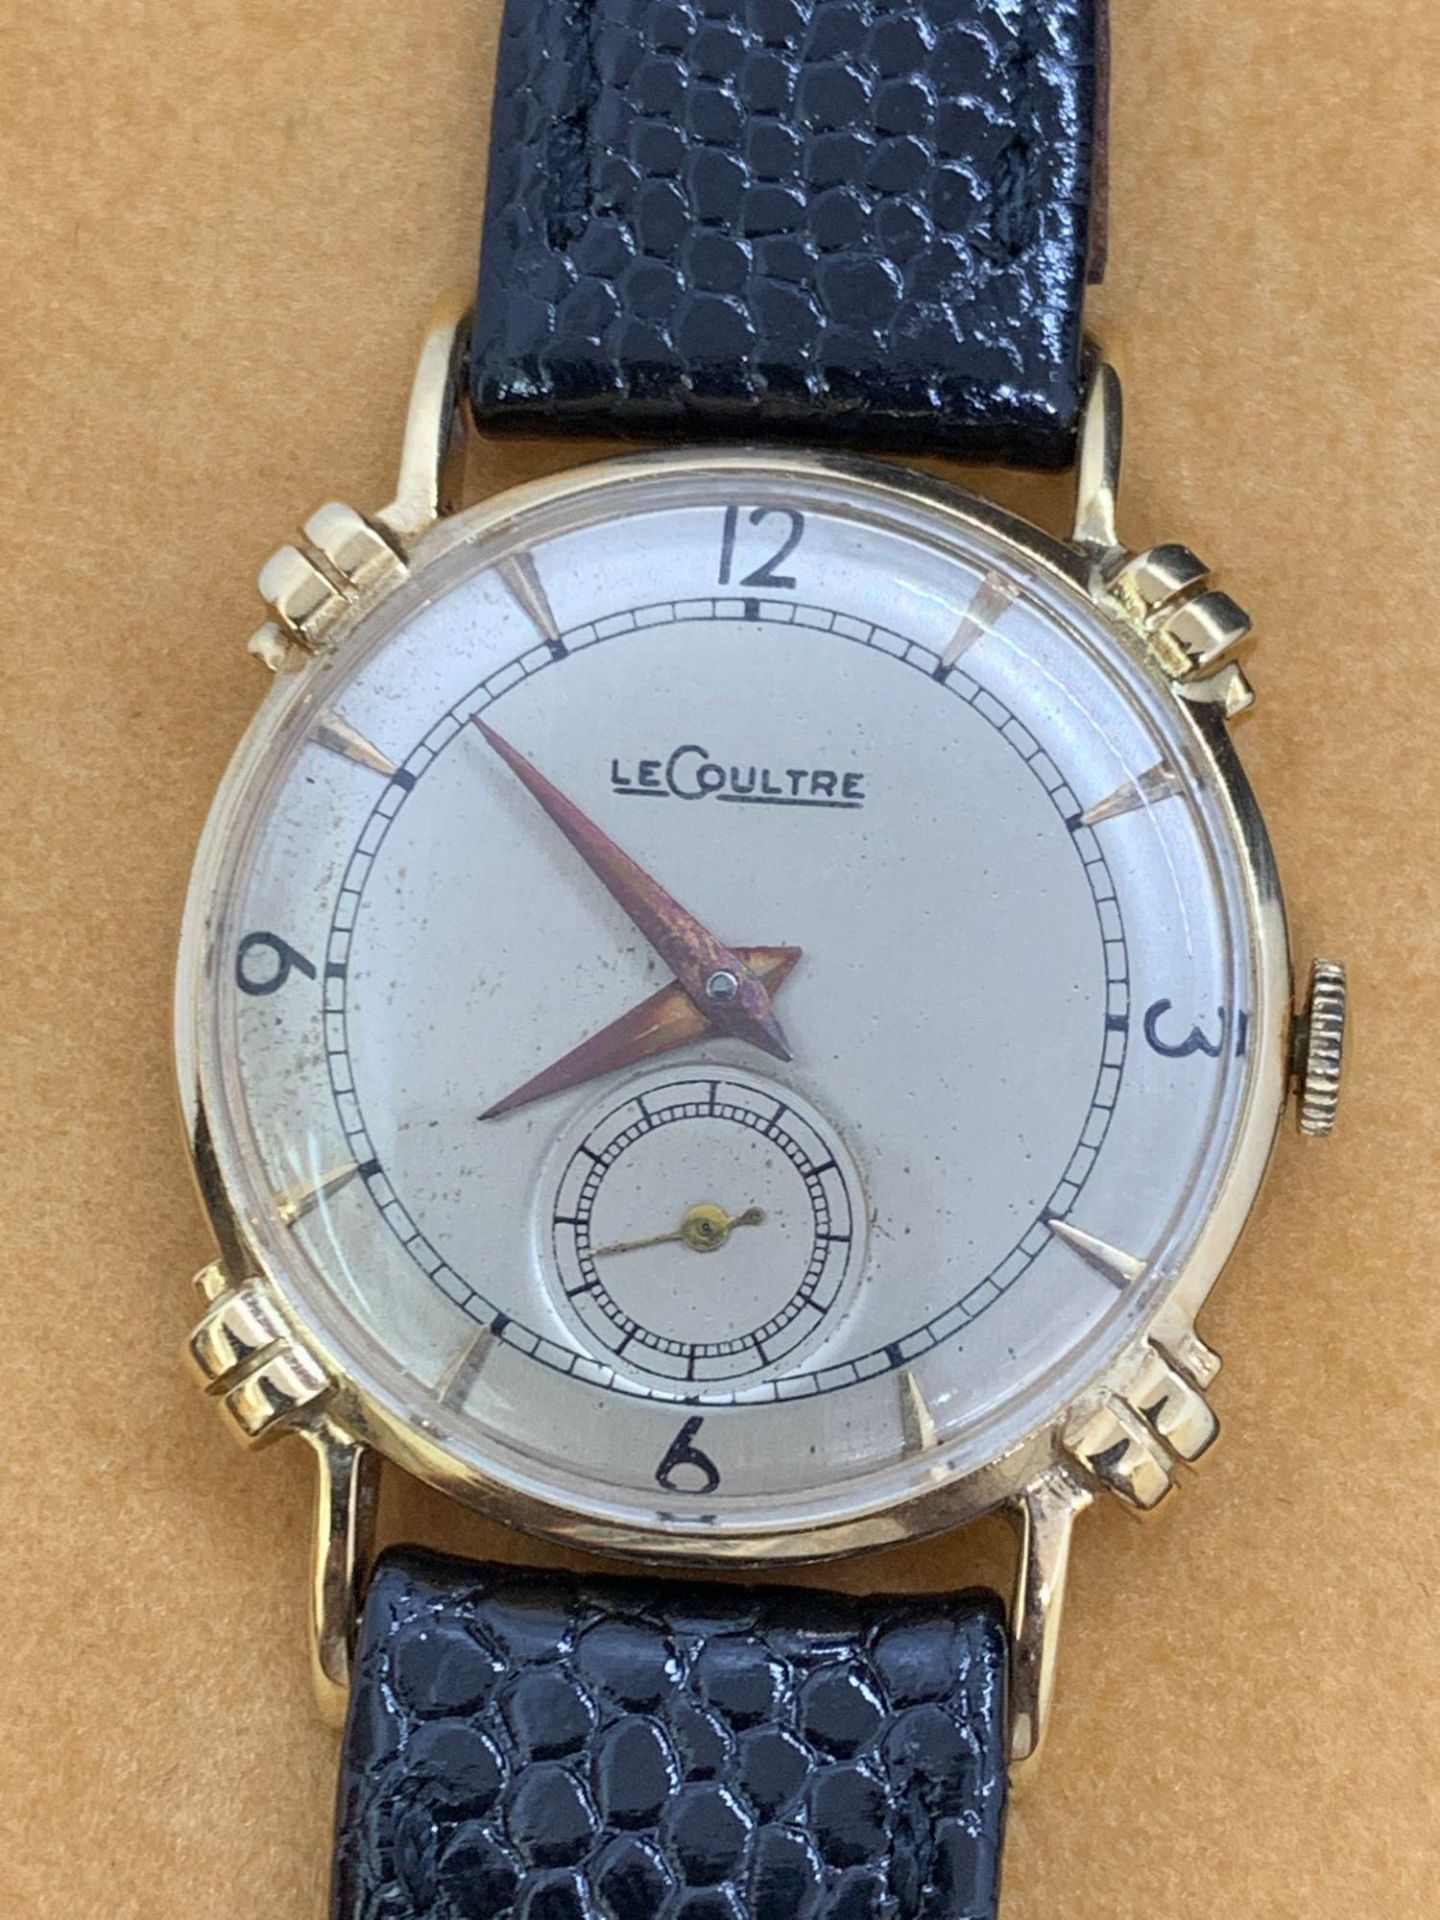 30mm 14k Gold Le Coultre Watch